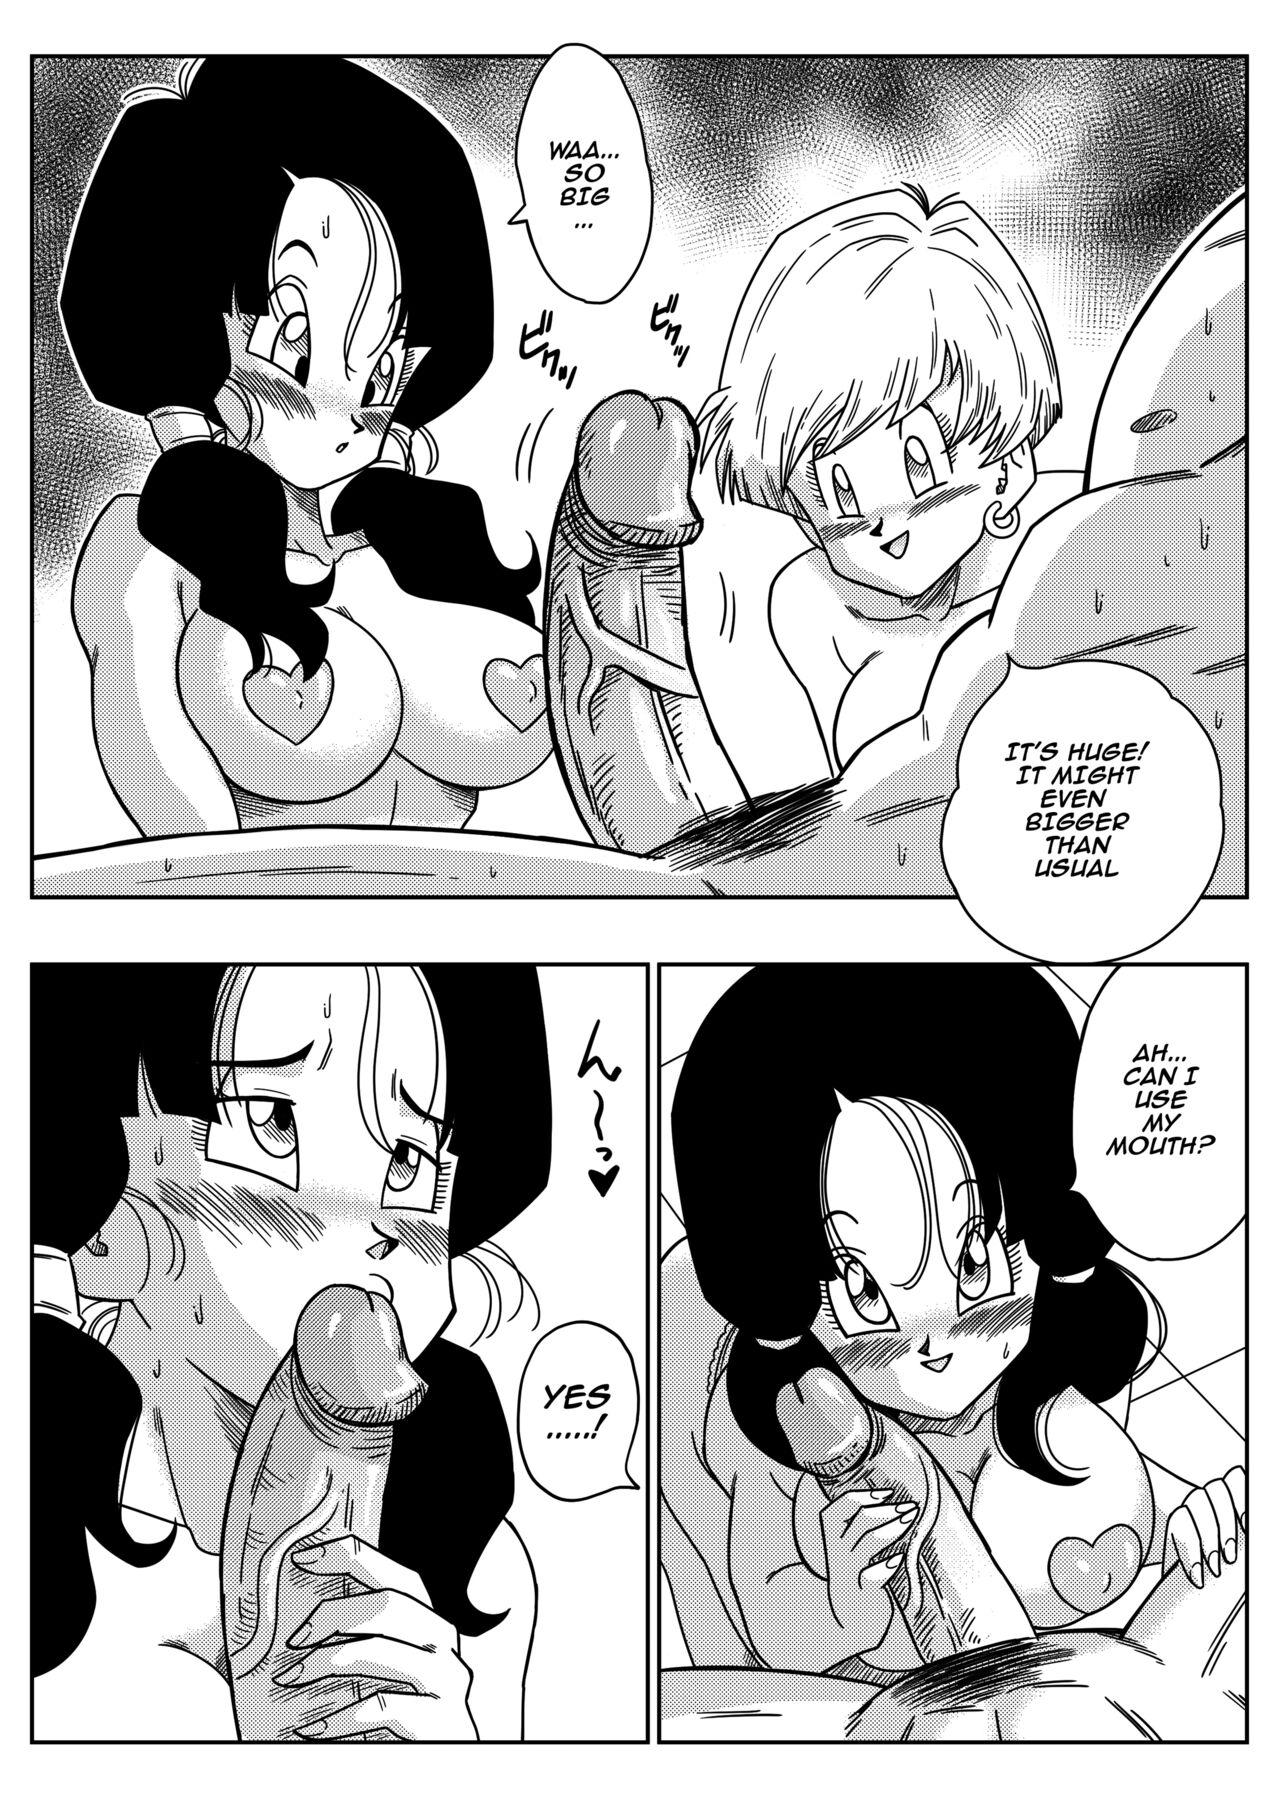 Peruana LOVE TRIANGLE Z - Part 2 Blondes - Page 7